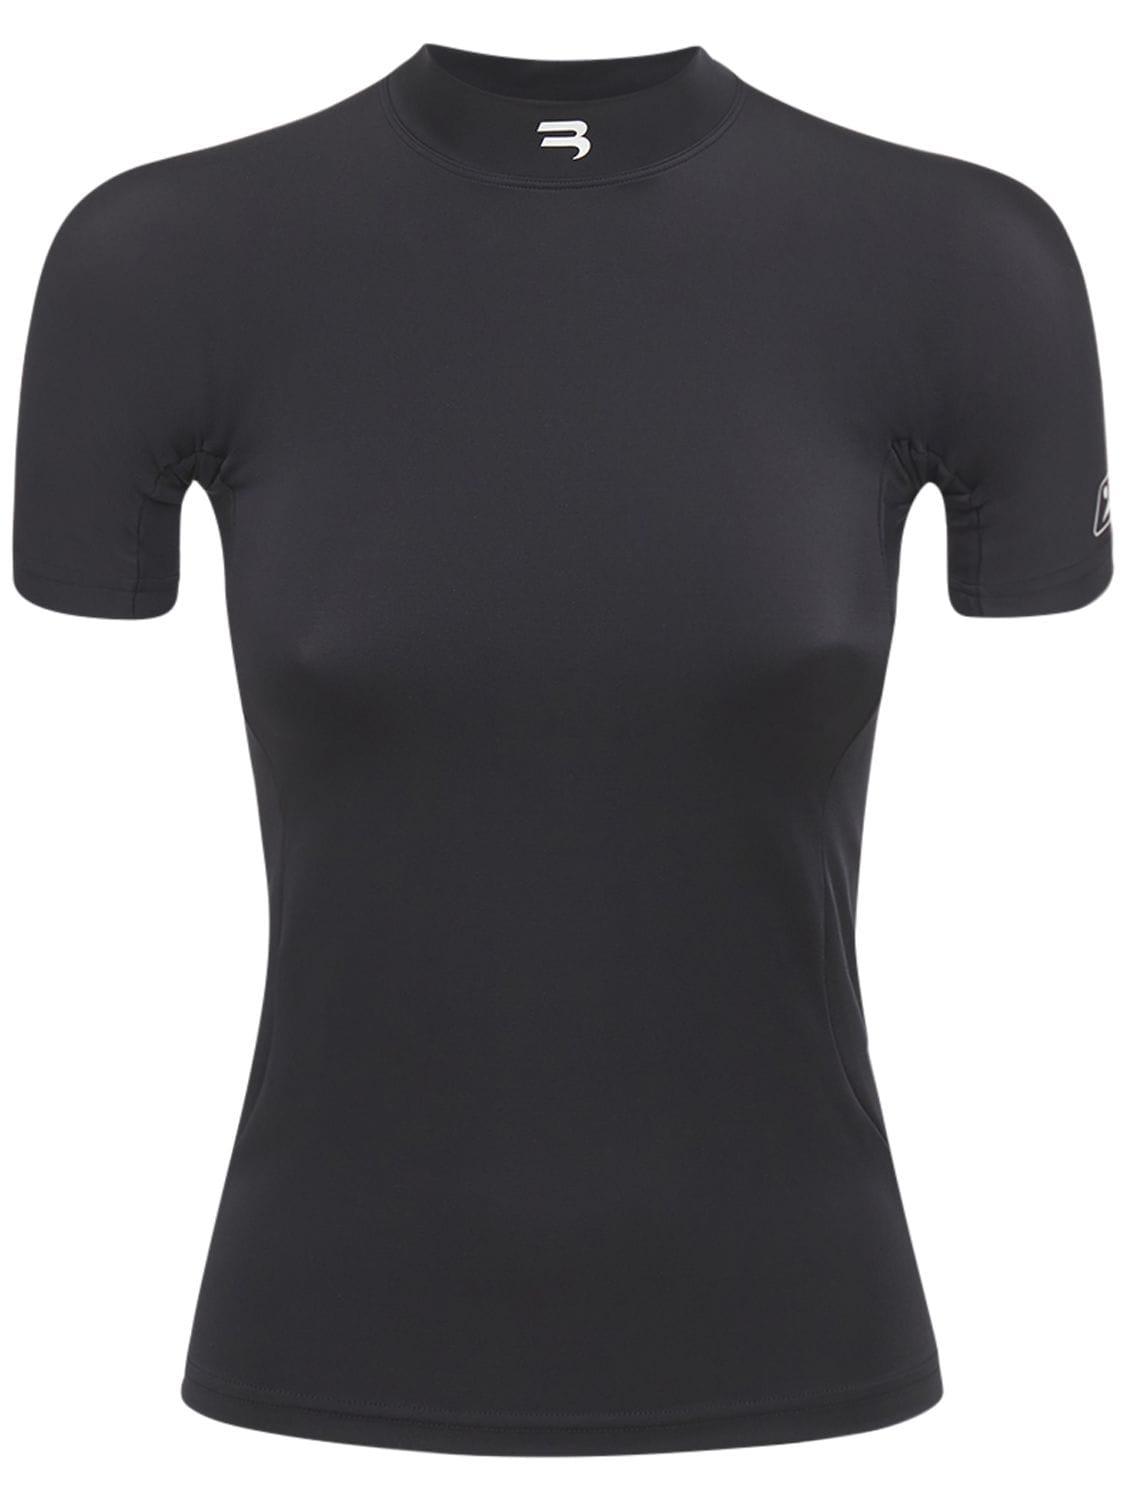 Balenciaga Fitted Spandex Long-Sleeve Top